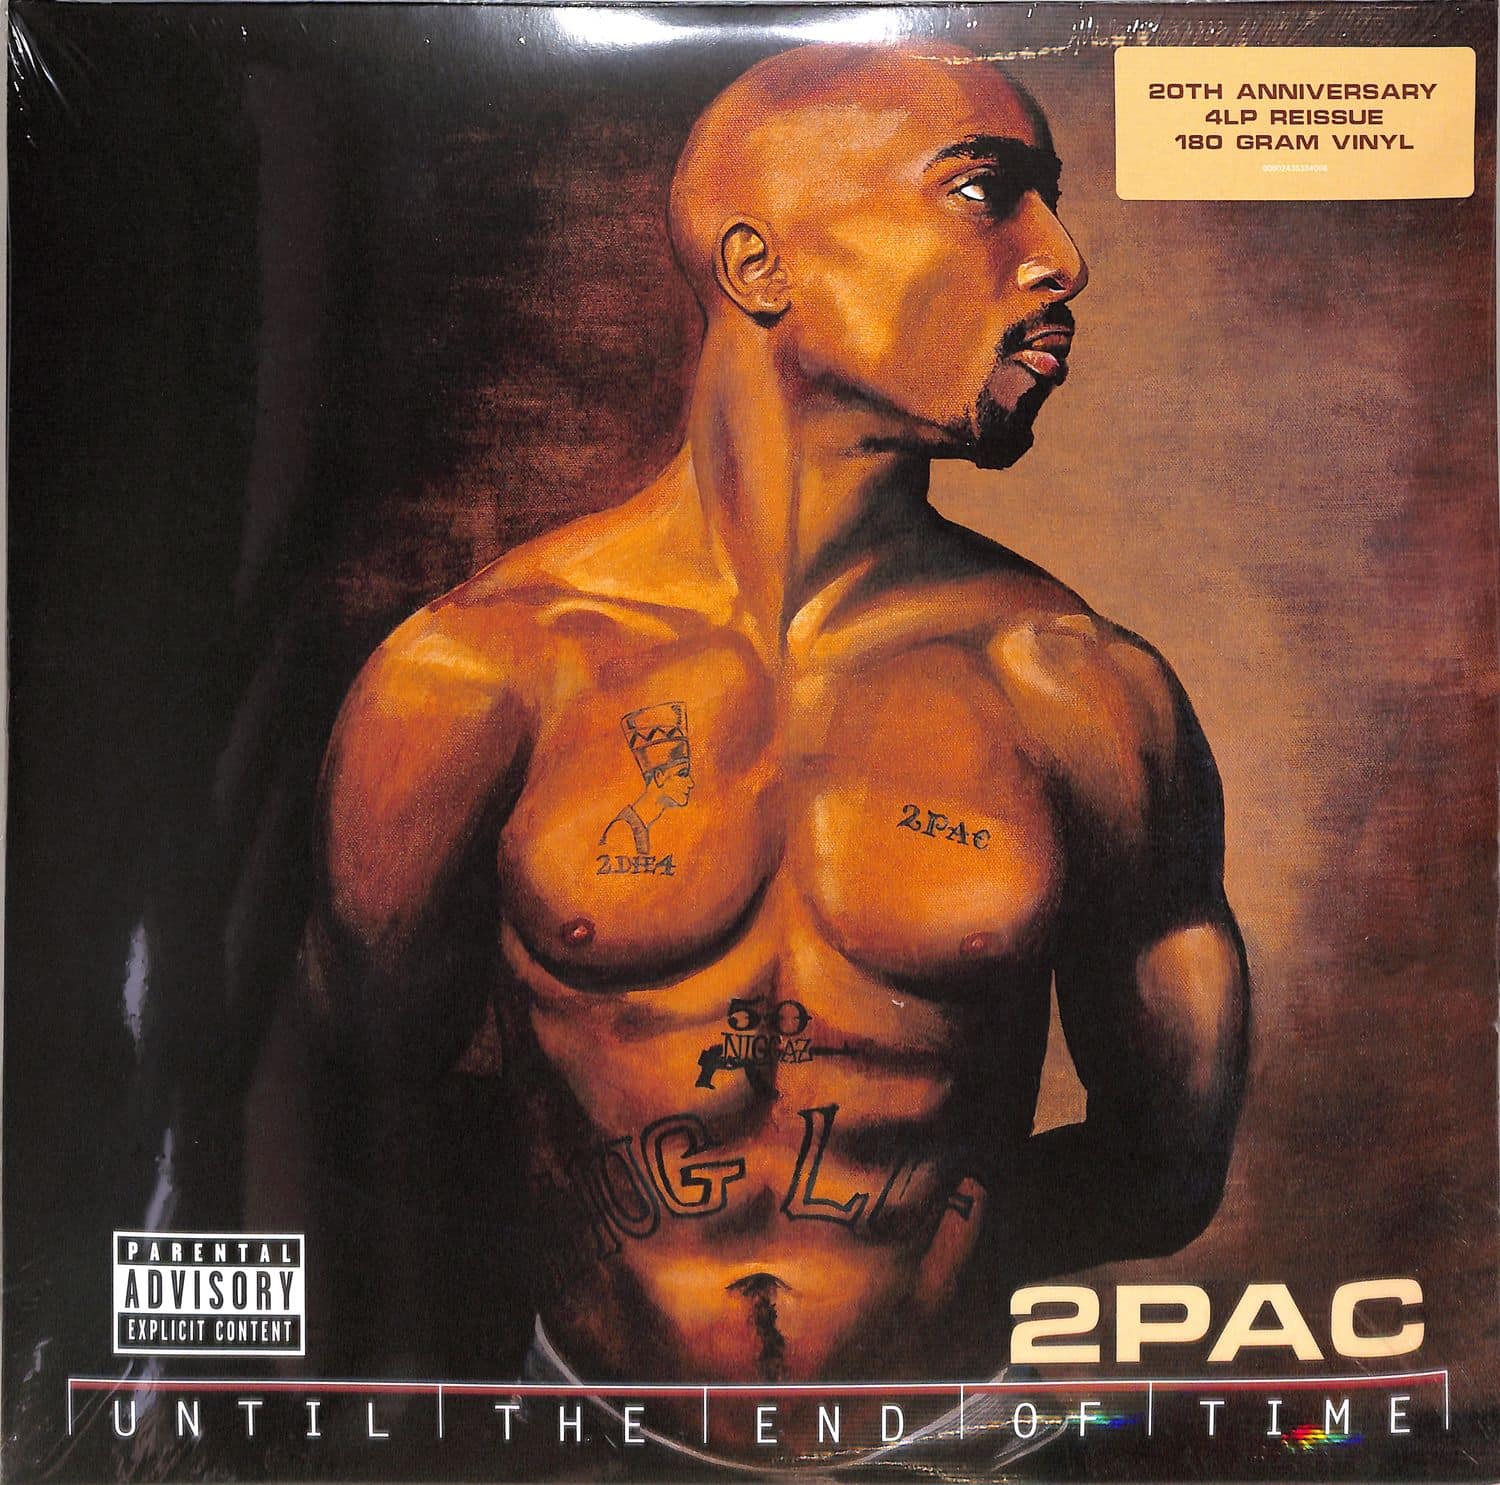 2pac - UNTIL THE END OF TIME 